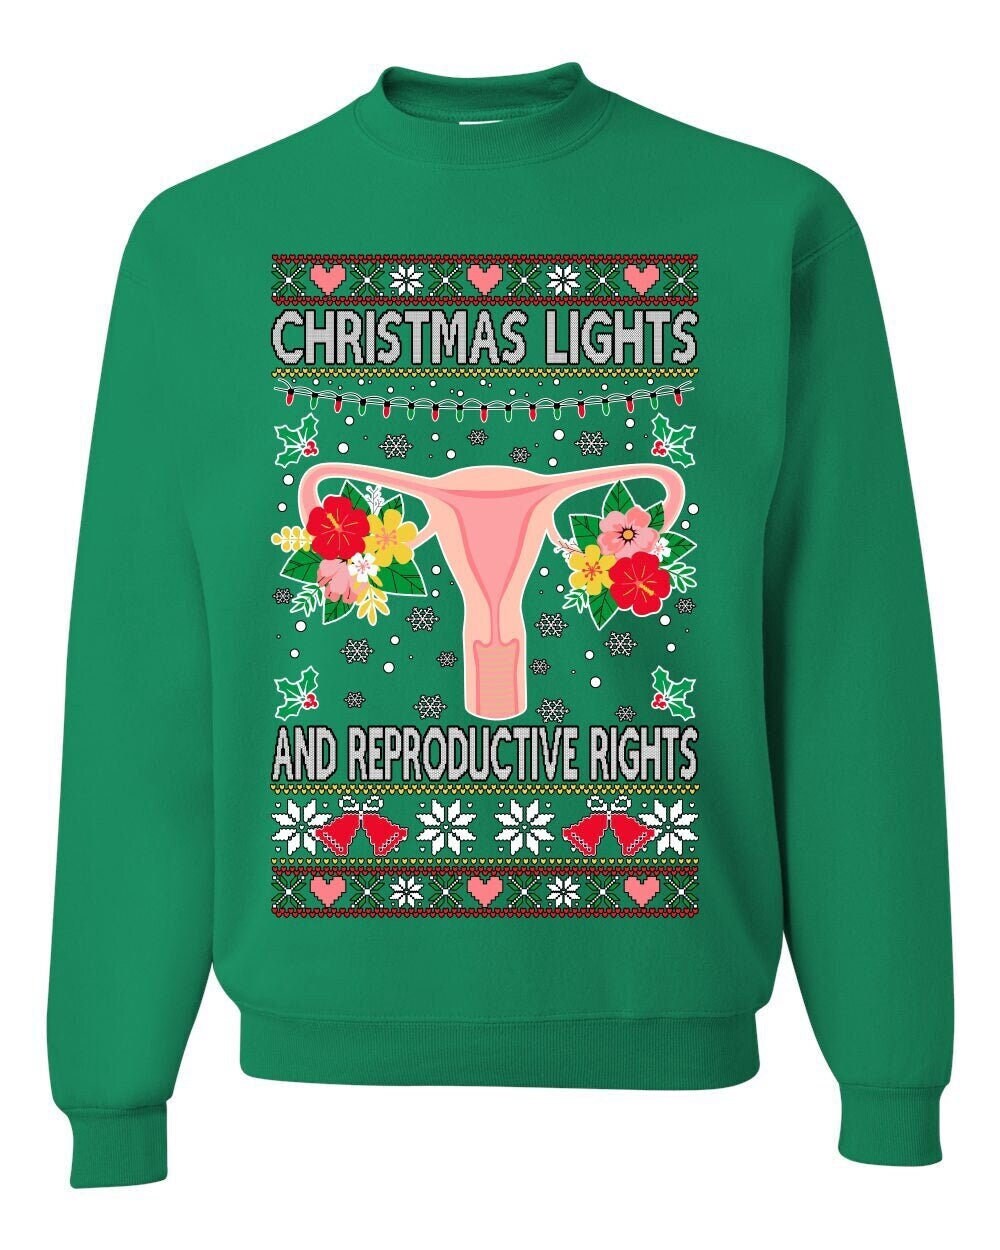 Discover Christmas Lights & Reproductive Rights Ugly Christmas Sweater Unisex Crewneck Graphic Sweatshirts